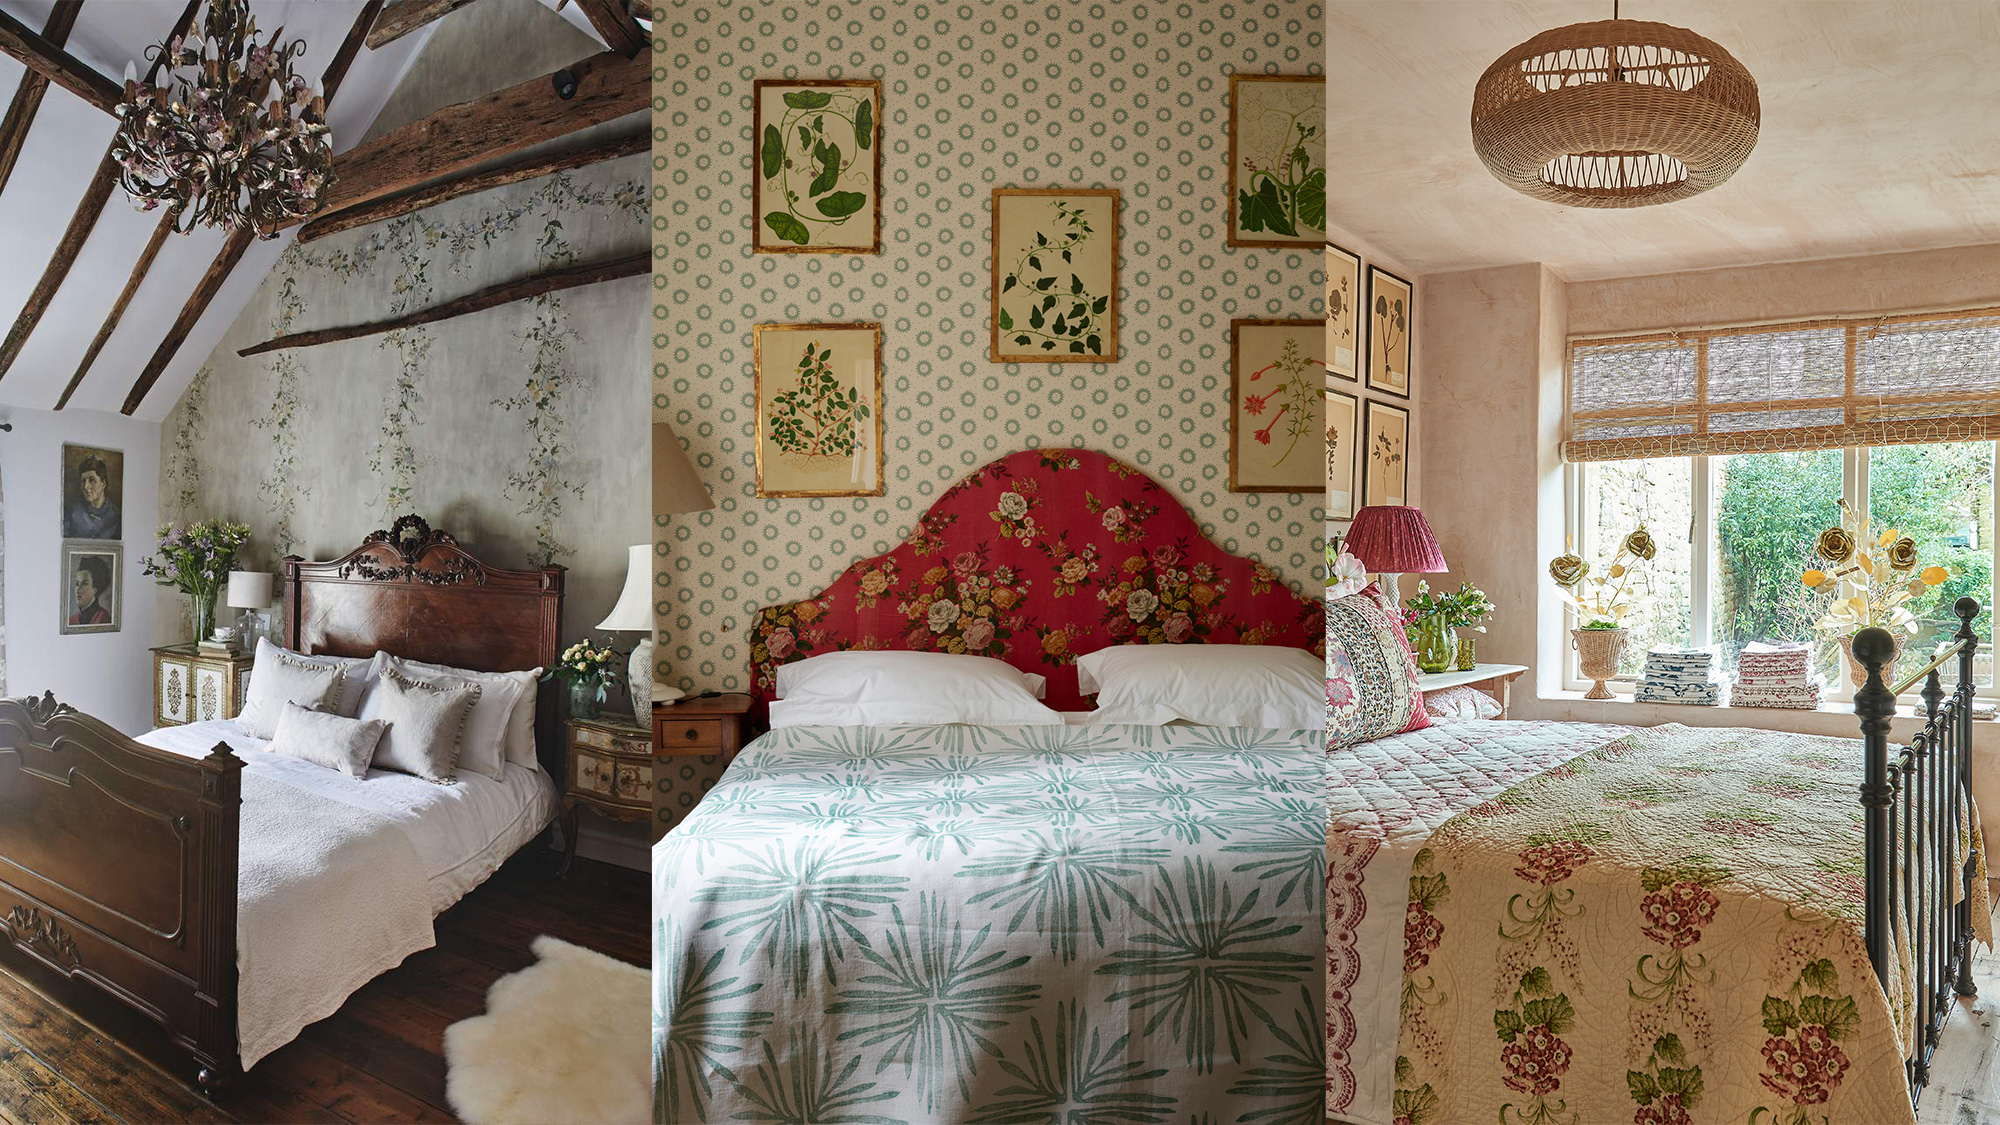 A Comprehensive Guide to Various Vintage Bedroom Ideas